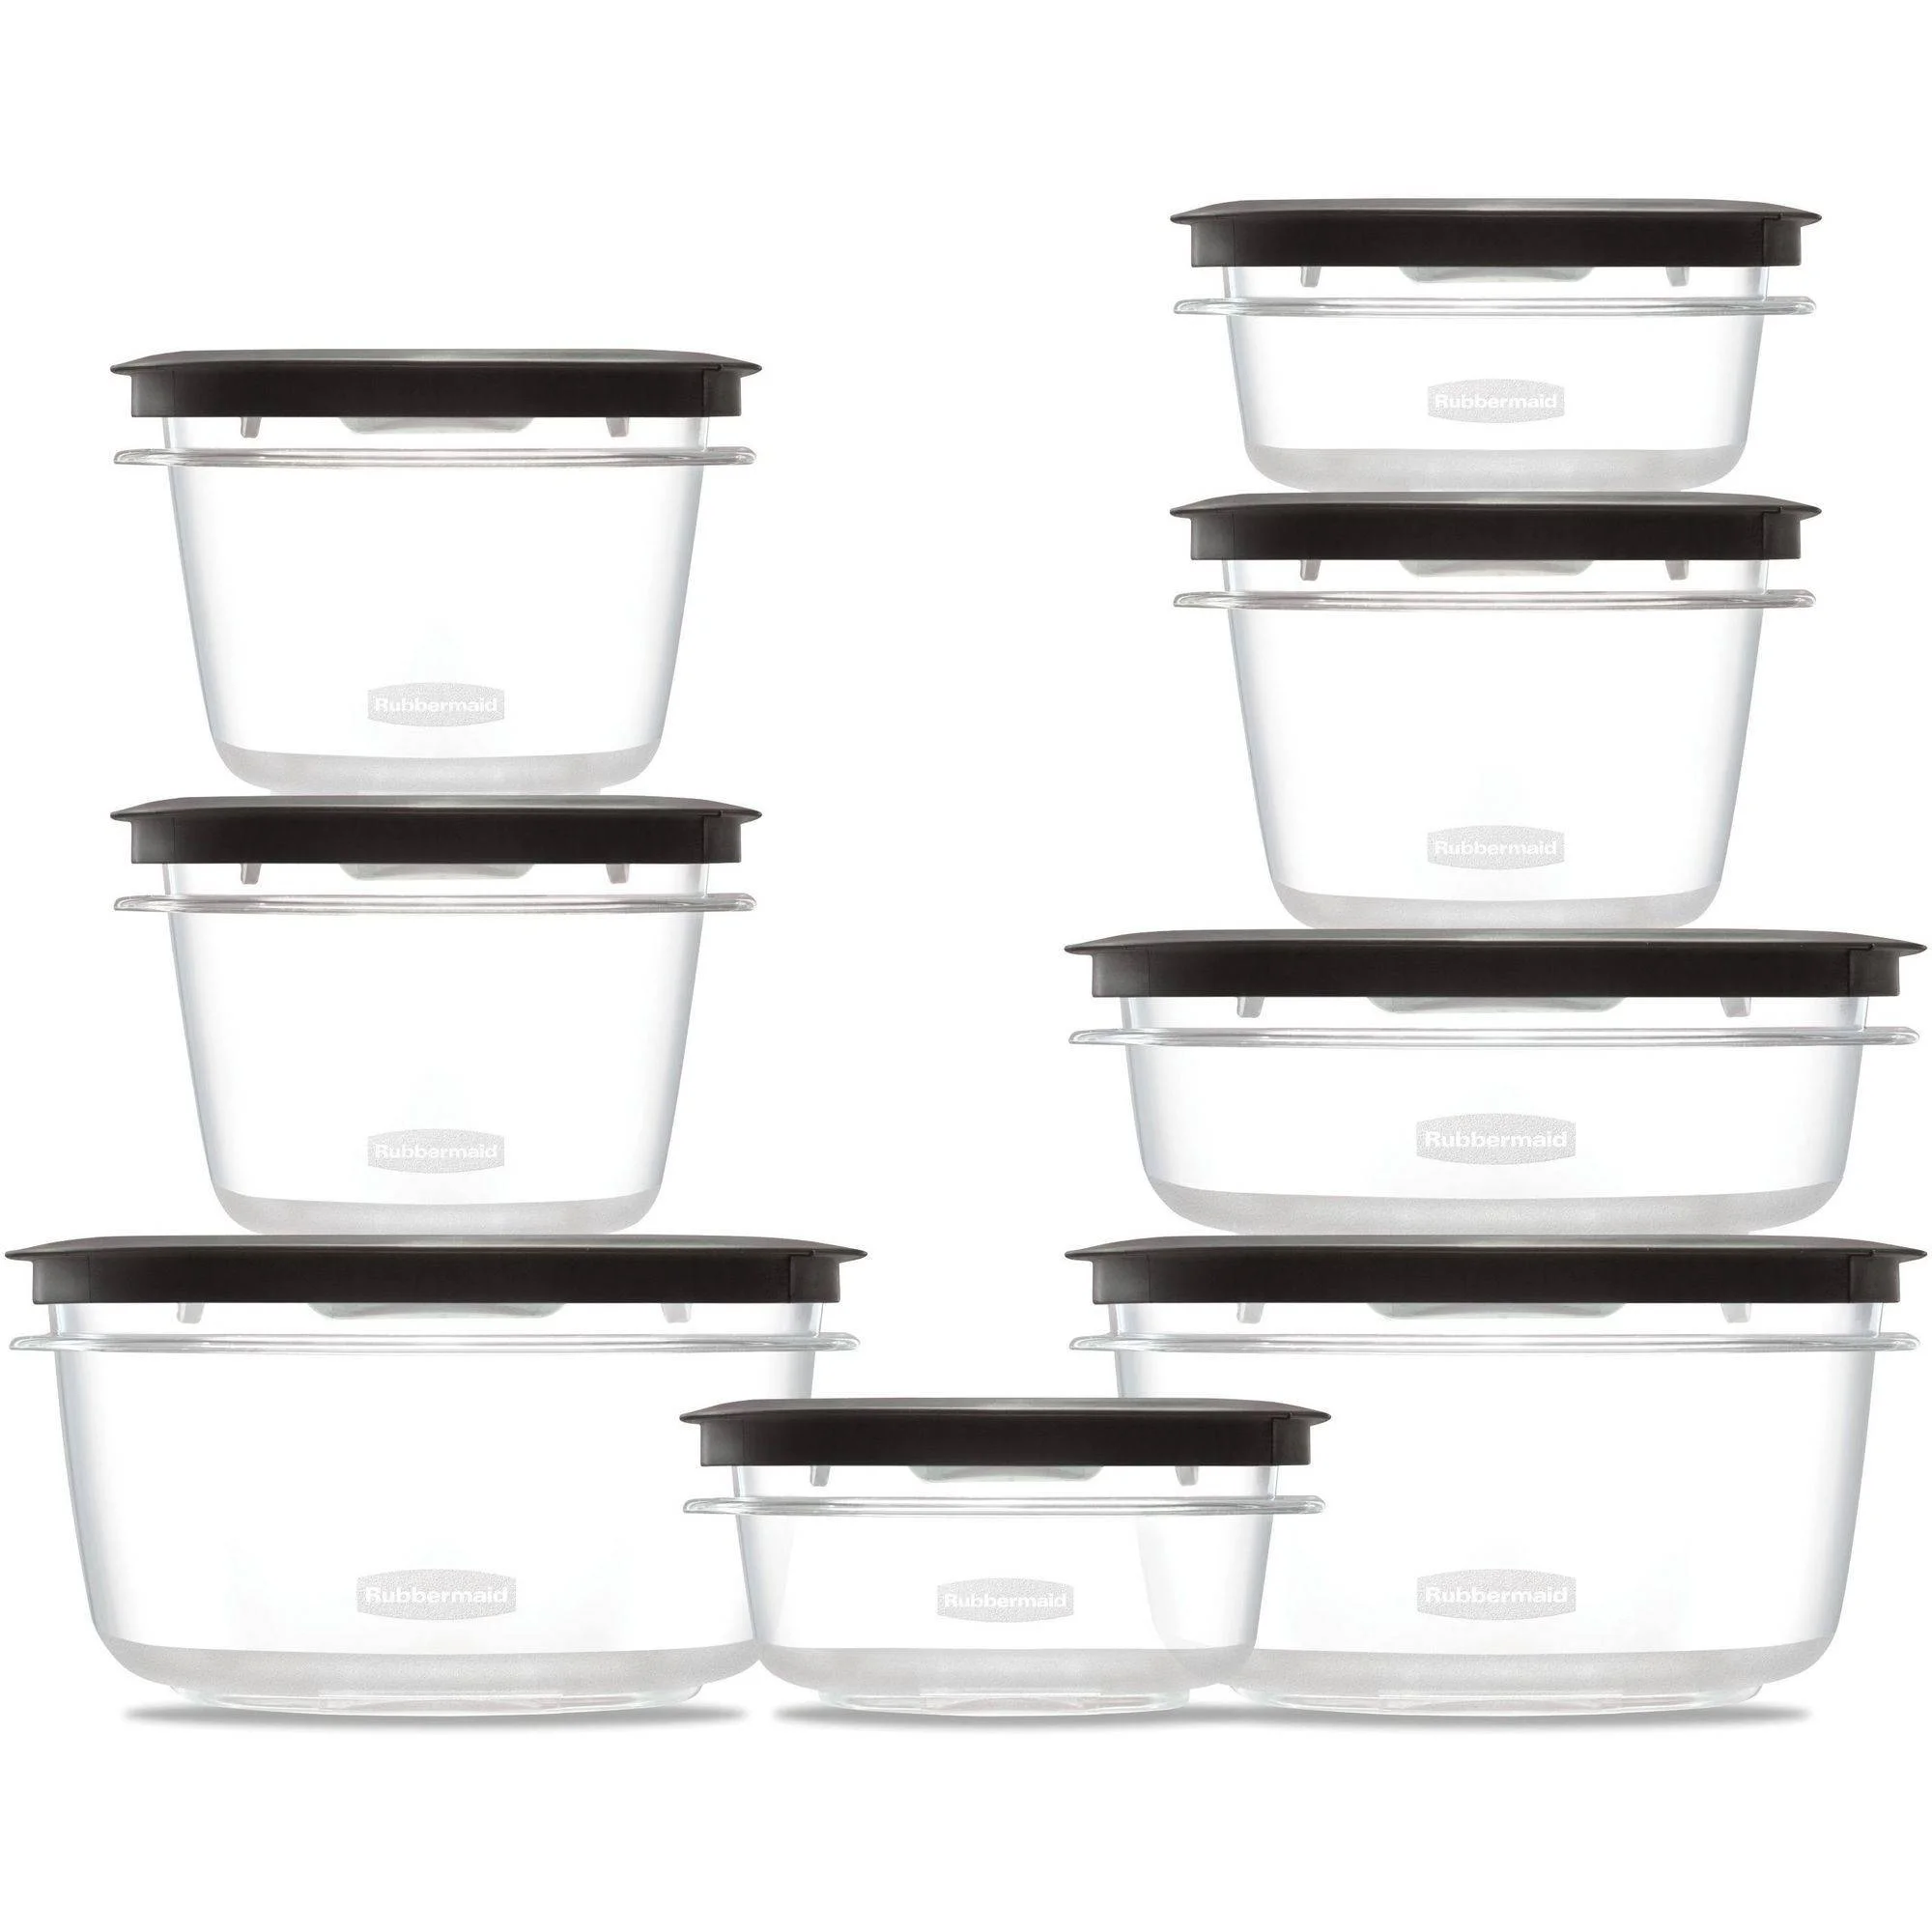 Rubbermaid Premier Easy Find Lids Meal Prep and Food Storage Containers, Set of 8 (16 Pieces Total), Grey |BPA-Free & Stain Resistant